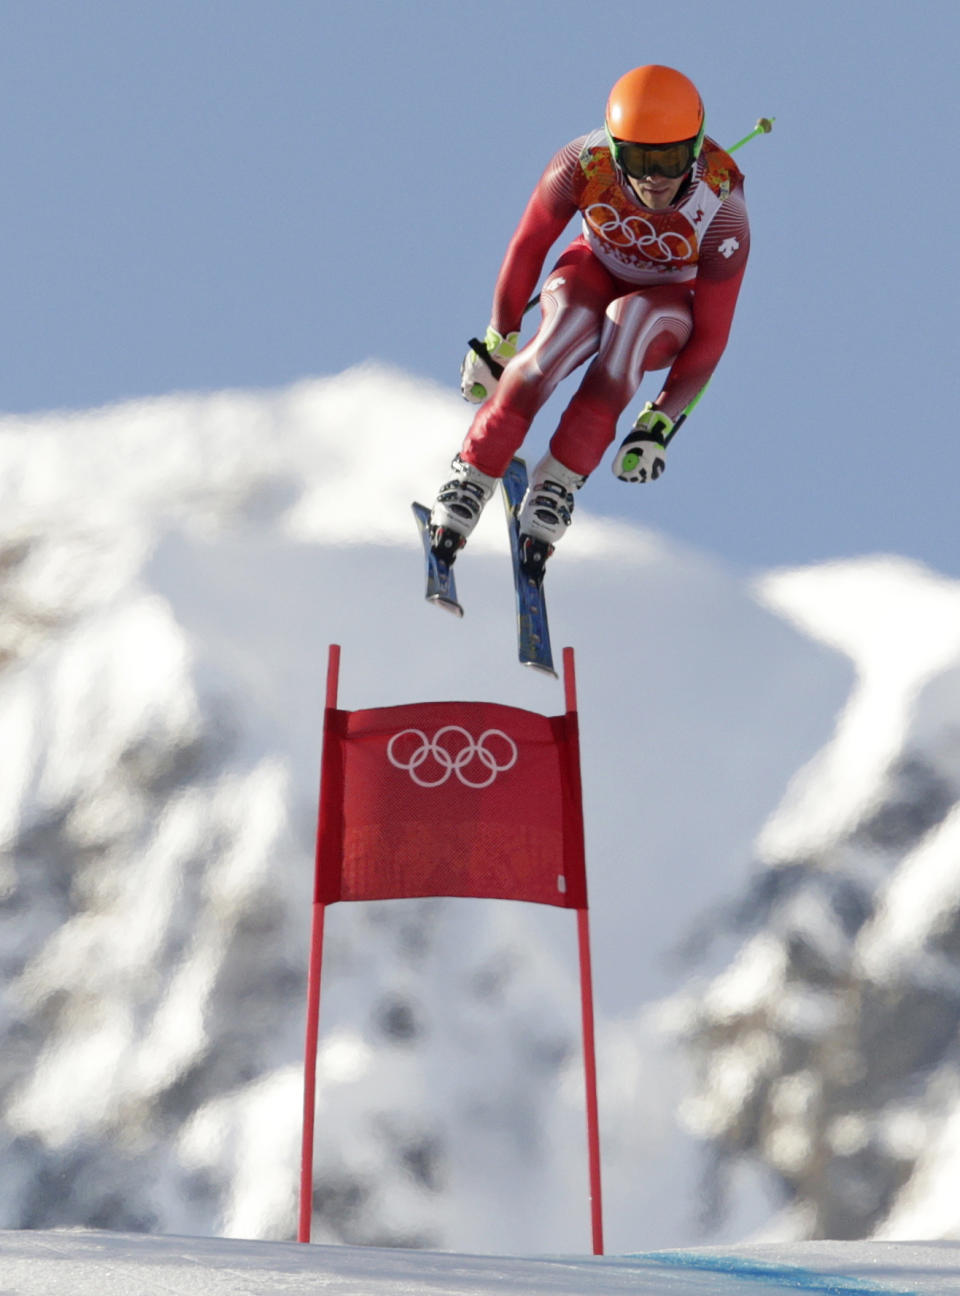 Switzerland's Sandro Viletta jumps during the downhill portion of the men's supercombined at the Sochi 2014 Winter Olympics, Friday, Feb. 14, 2014, in Krasnaya Polyana, Russia. (AP Photo/Charles Krupa)